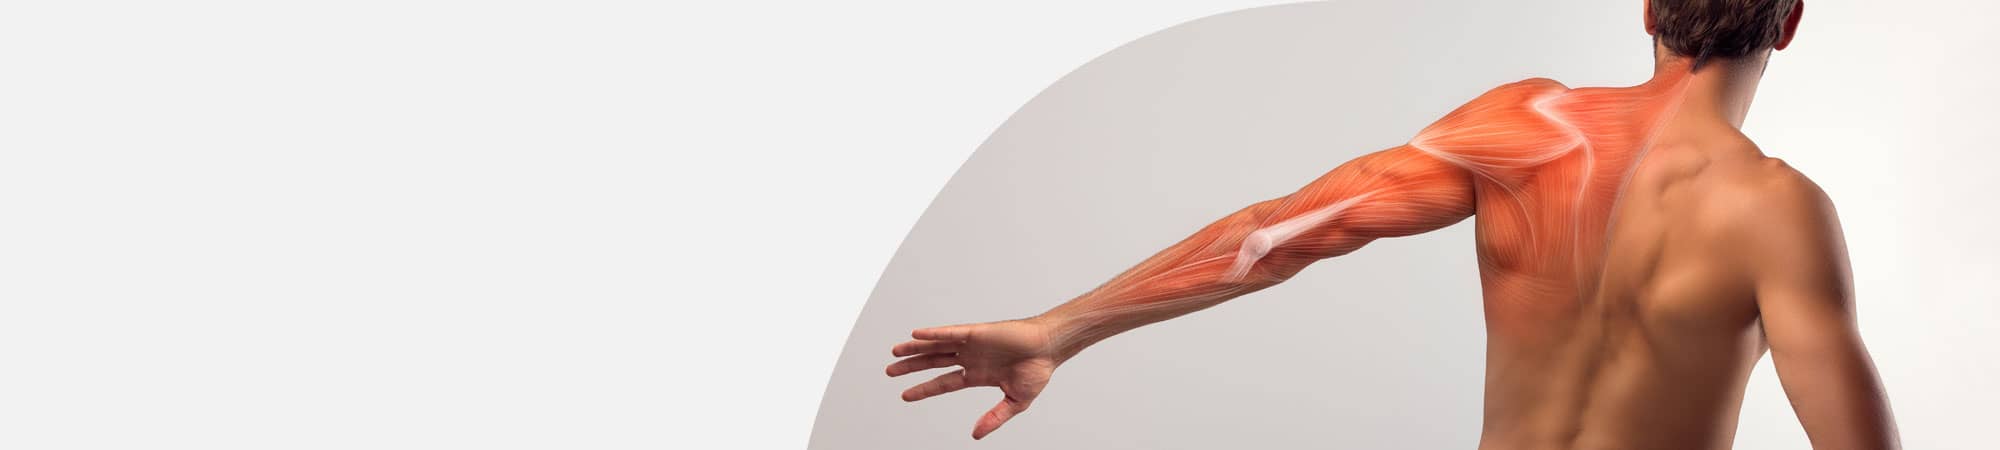 Photo showing human male ligaments in arm and back